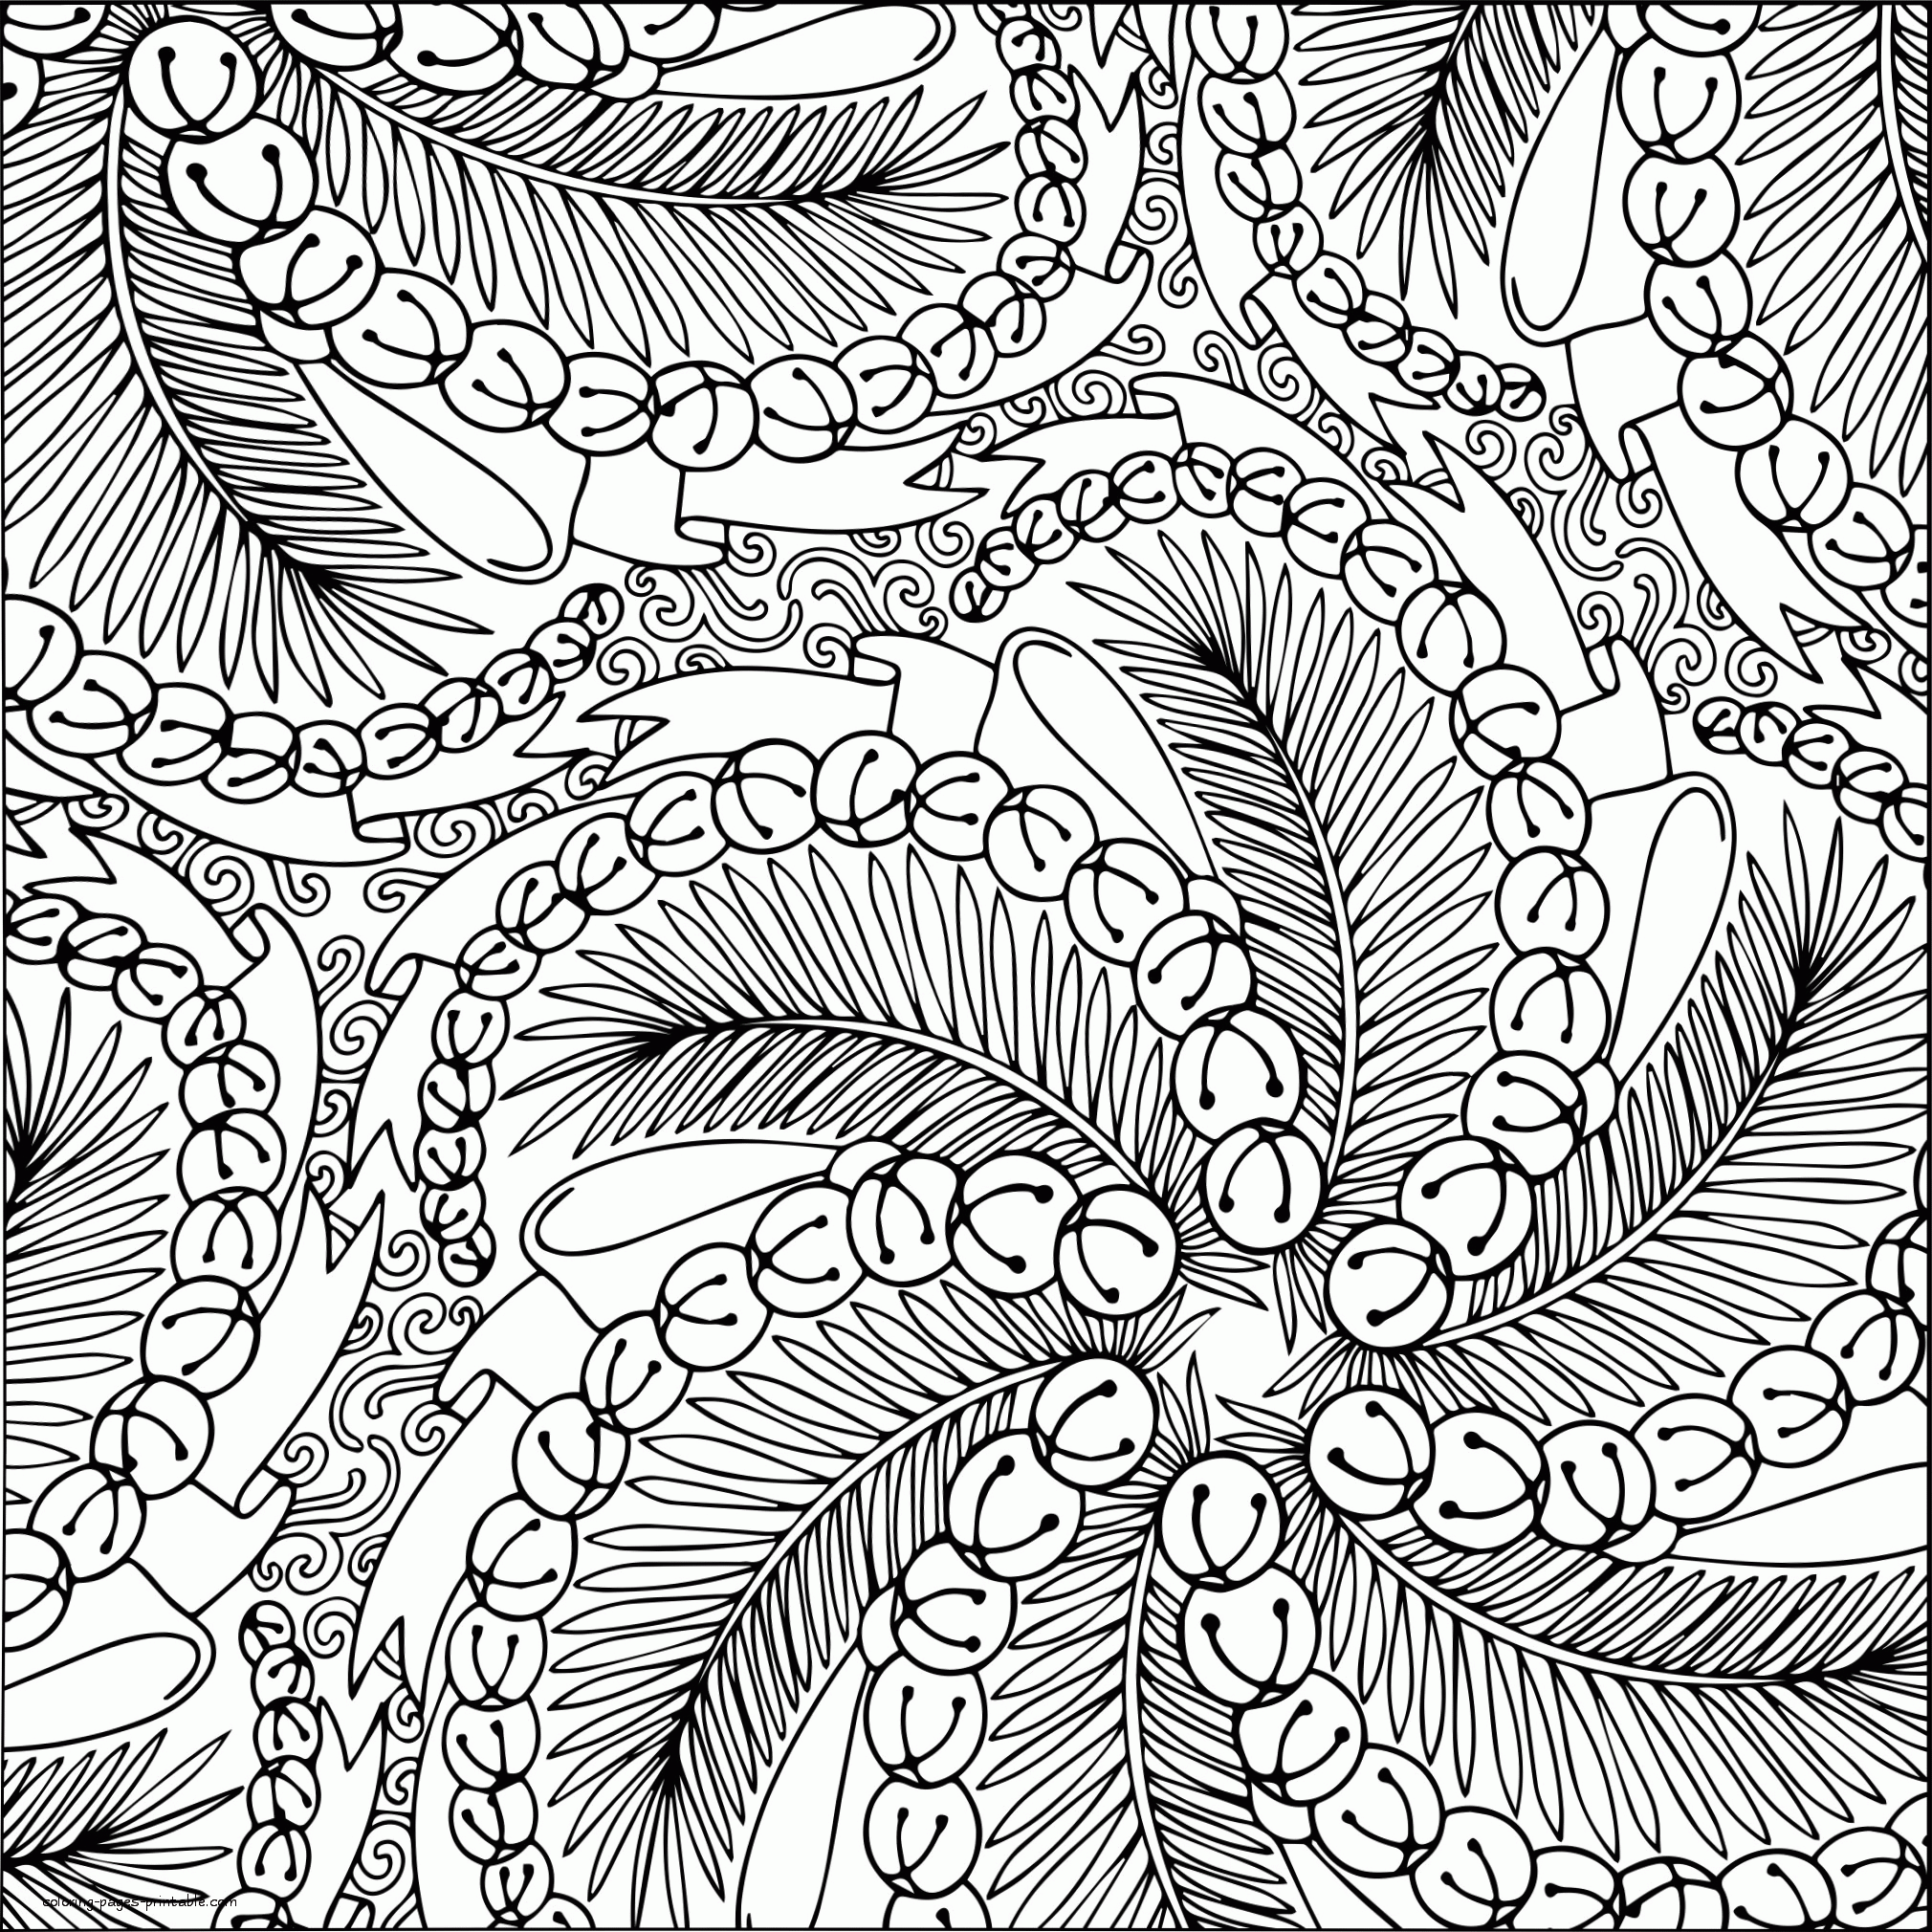 online christmas coloring pages for adults Christmas coloring pages for adults